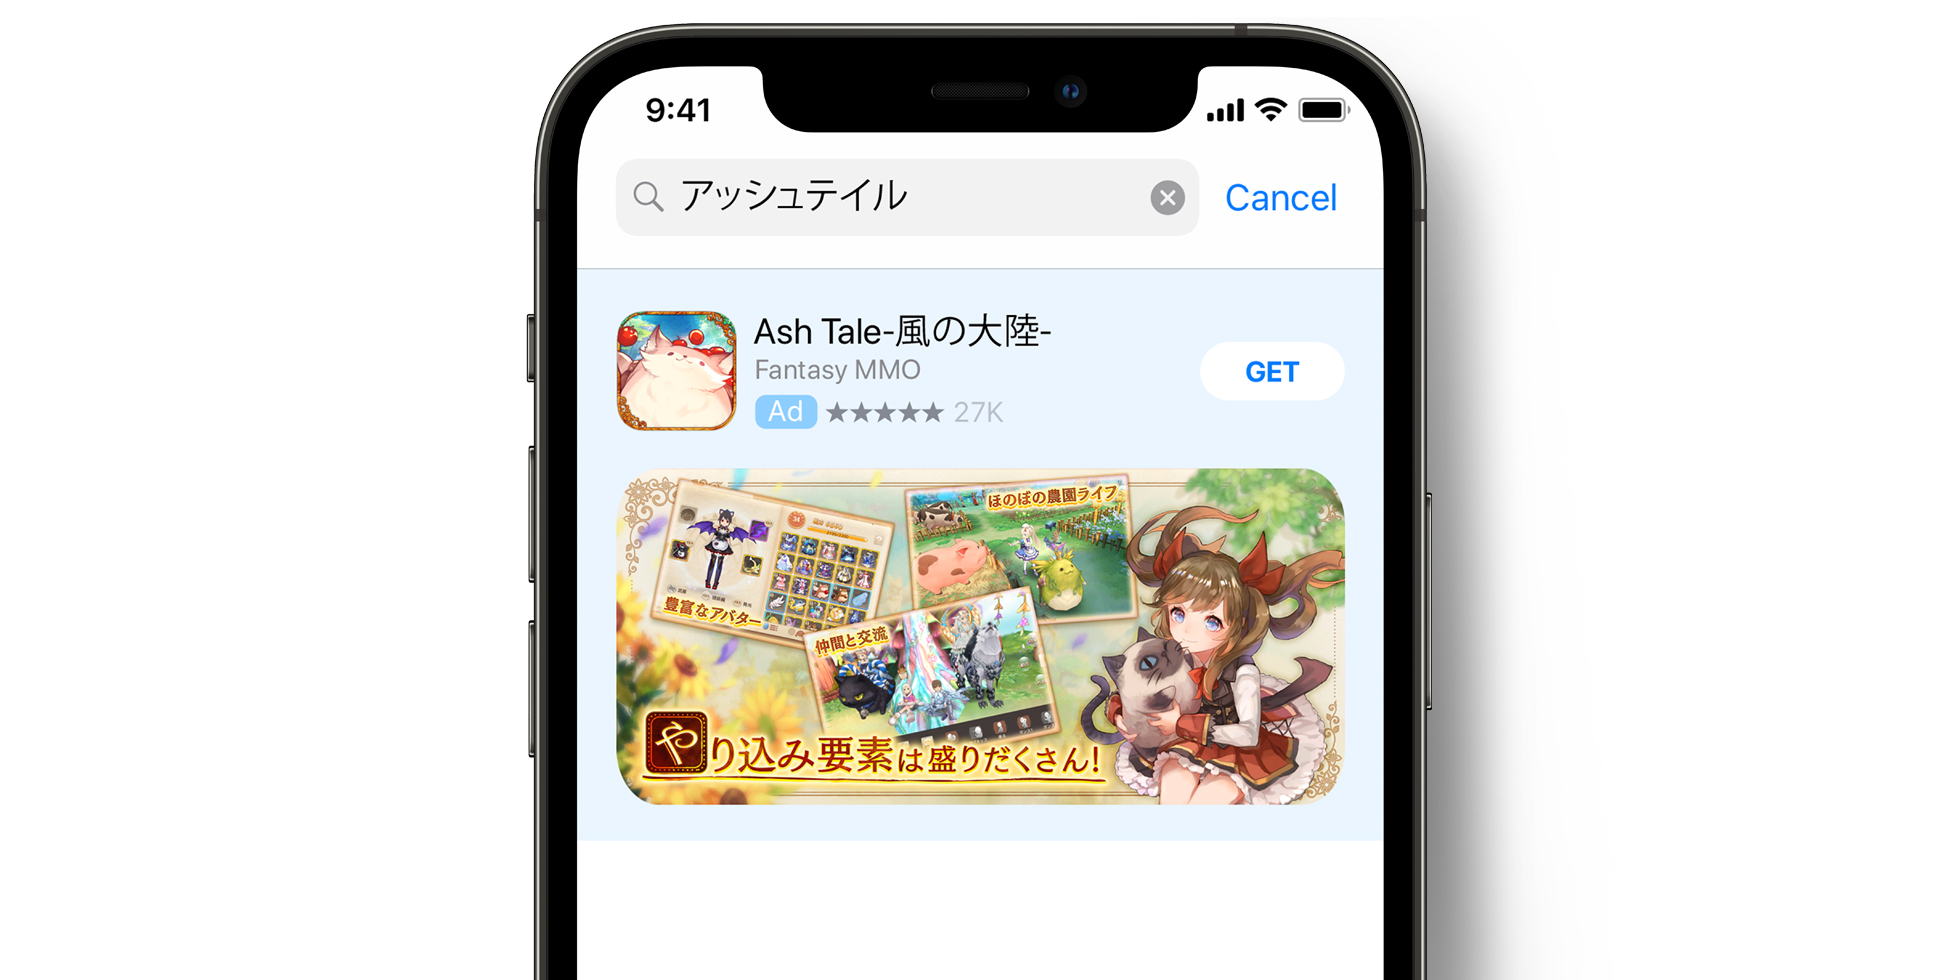 Ash Tale ad on the App Store 